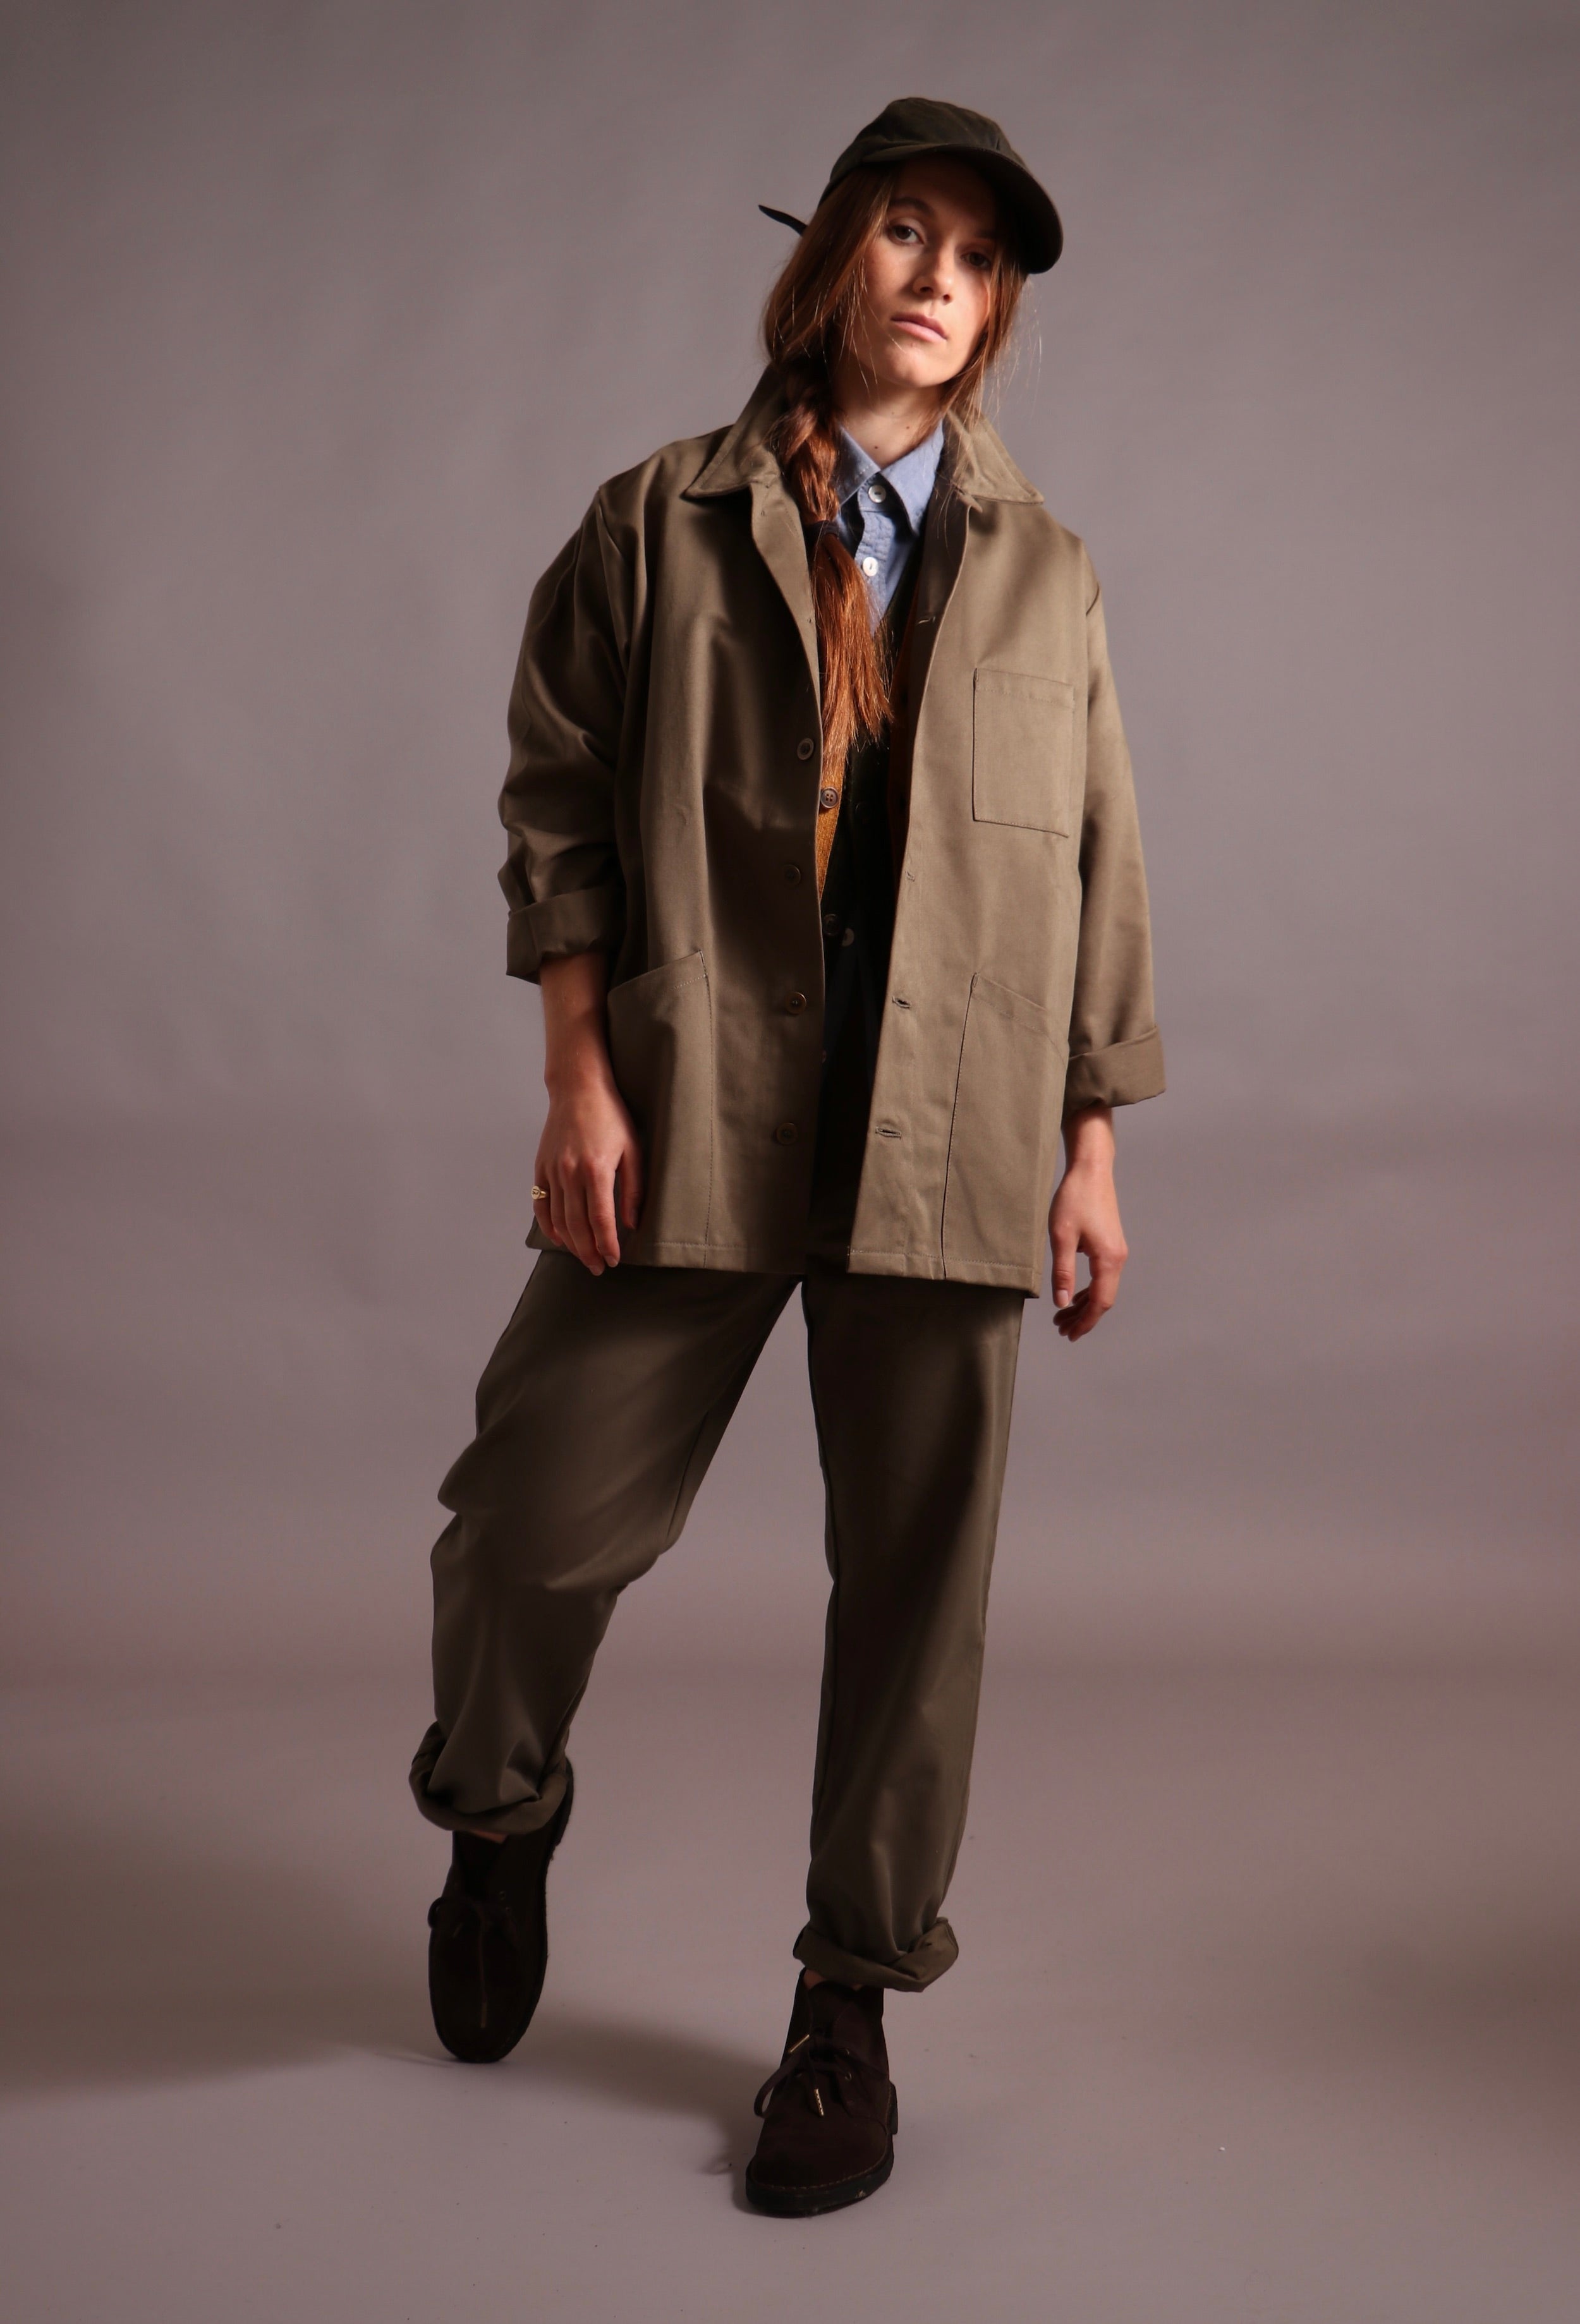 ecca wears Carrier Company Norfolk Work jacket with Sleeveless Cardigans, Pinpoint Chambray Shirt, Oilskin Cap and Women's Work Trouser